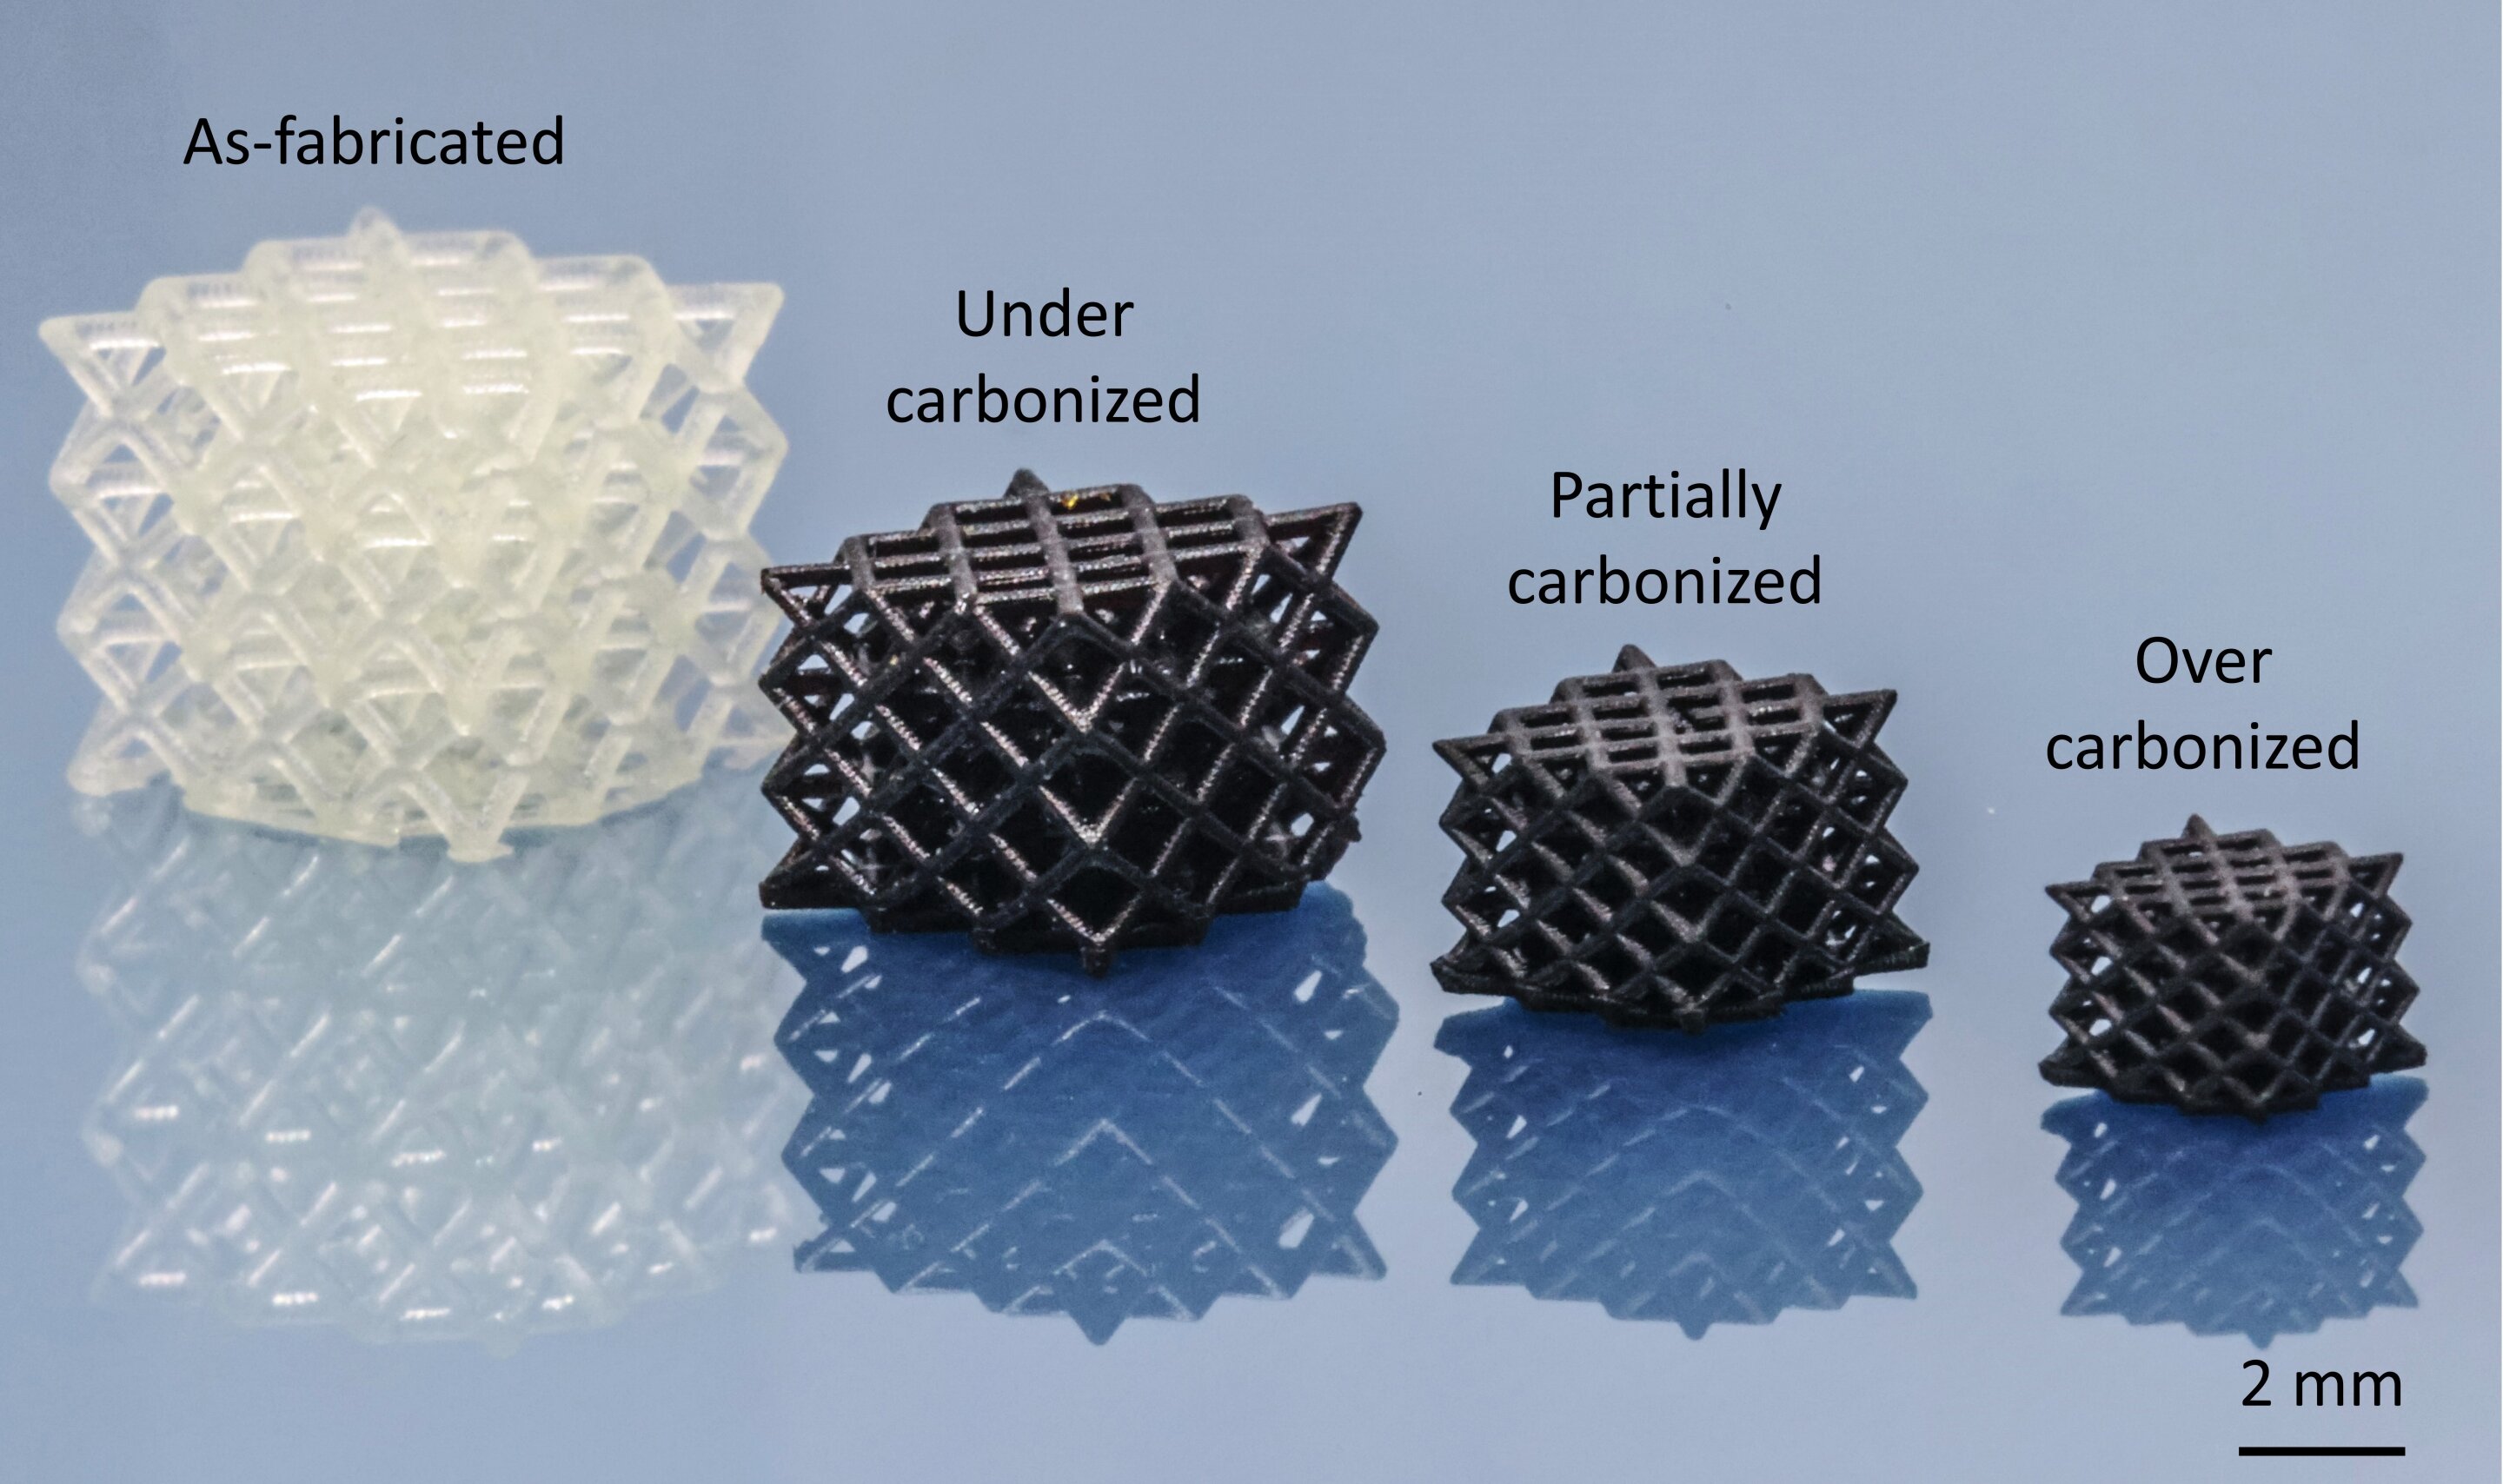 3D Printed Energy Harvesters Could Make Your Home More Sustainable 